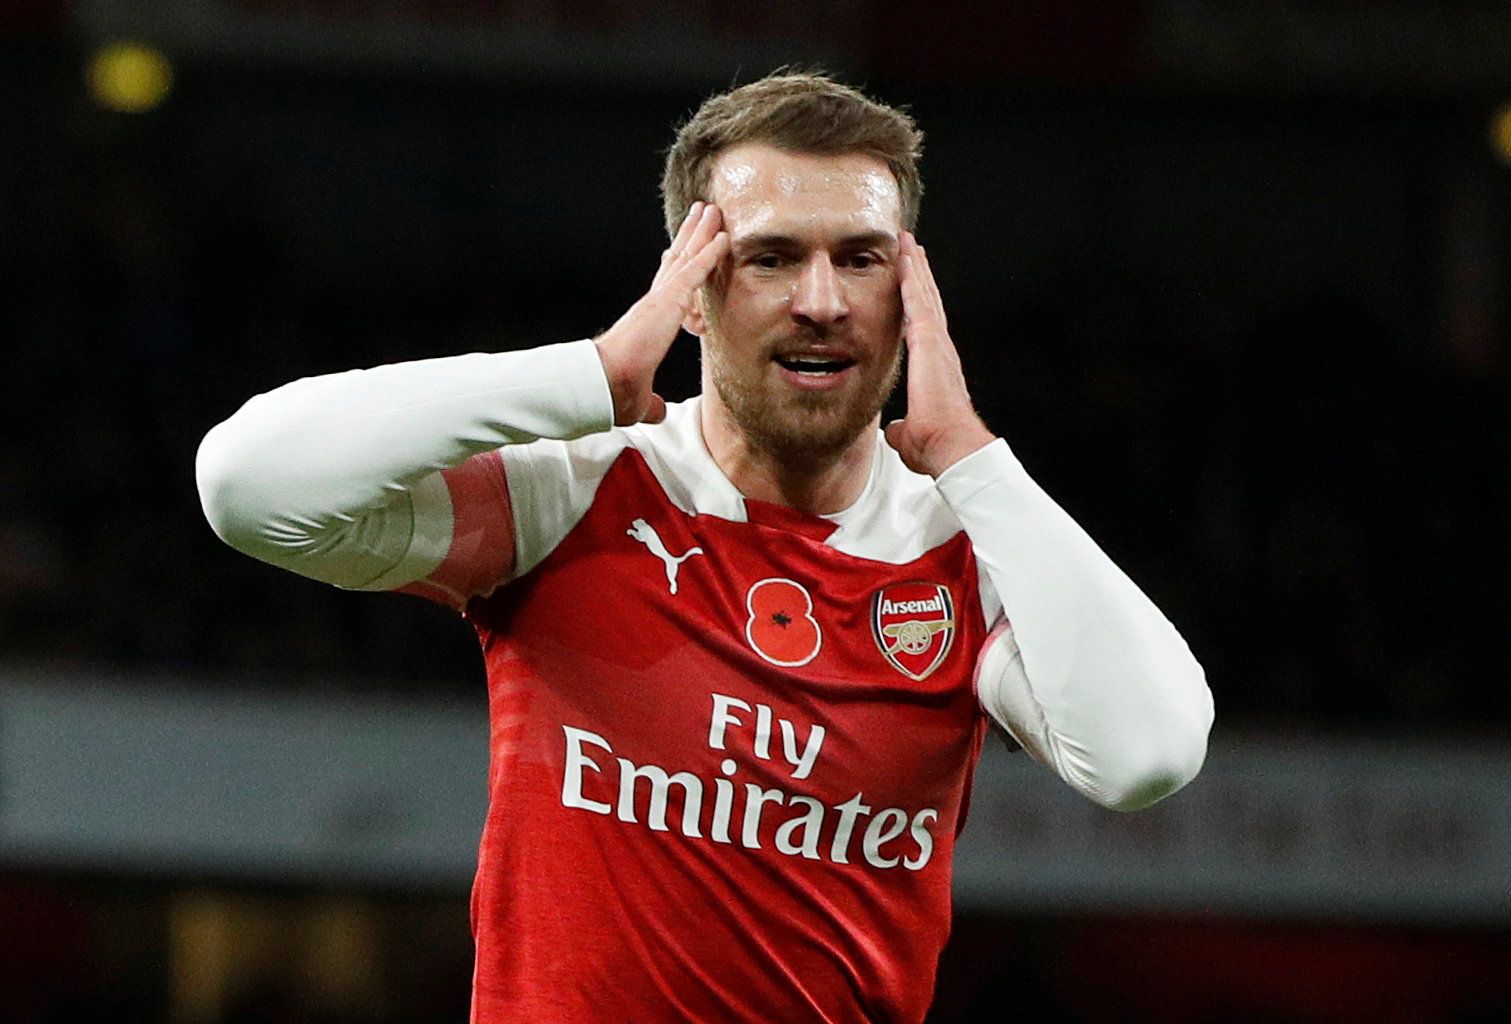 Soccer Football - Premier League - Arsenal v Wolverhampton Wanderers - Emirates Stadium, London, Britain - November 11, 2018  Arsenal's Aaron Ramsey reacts  Action Images via Reuters/John Sibley  EDITORIAL USE ONLY. No use with unauthorized audio, video, data, fixture lists, club/league logos or "live" services. Online in-match use limited to 75 images, no video emulation. No use in betting, games or single club/league/player publications.  Please contact your account representative for further 